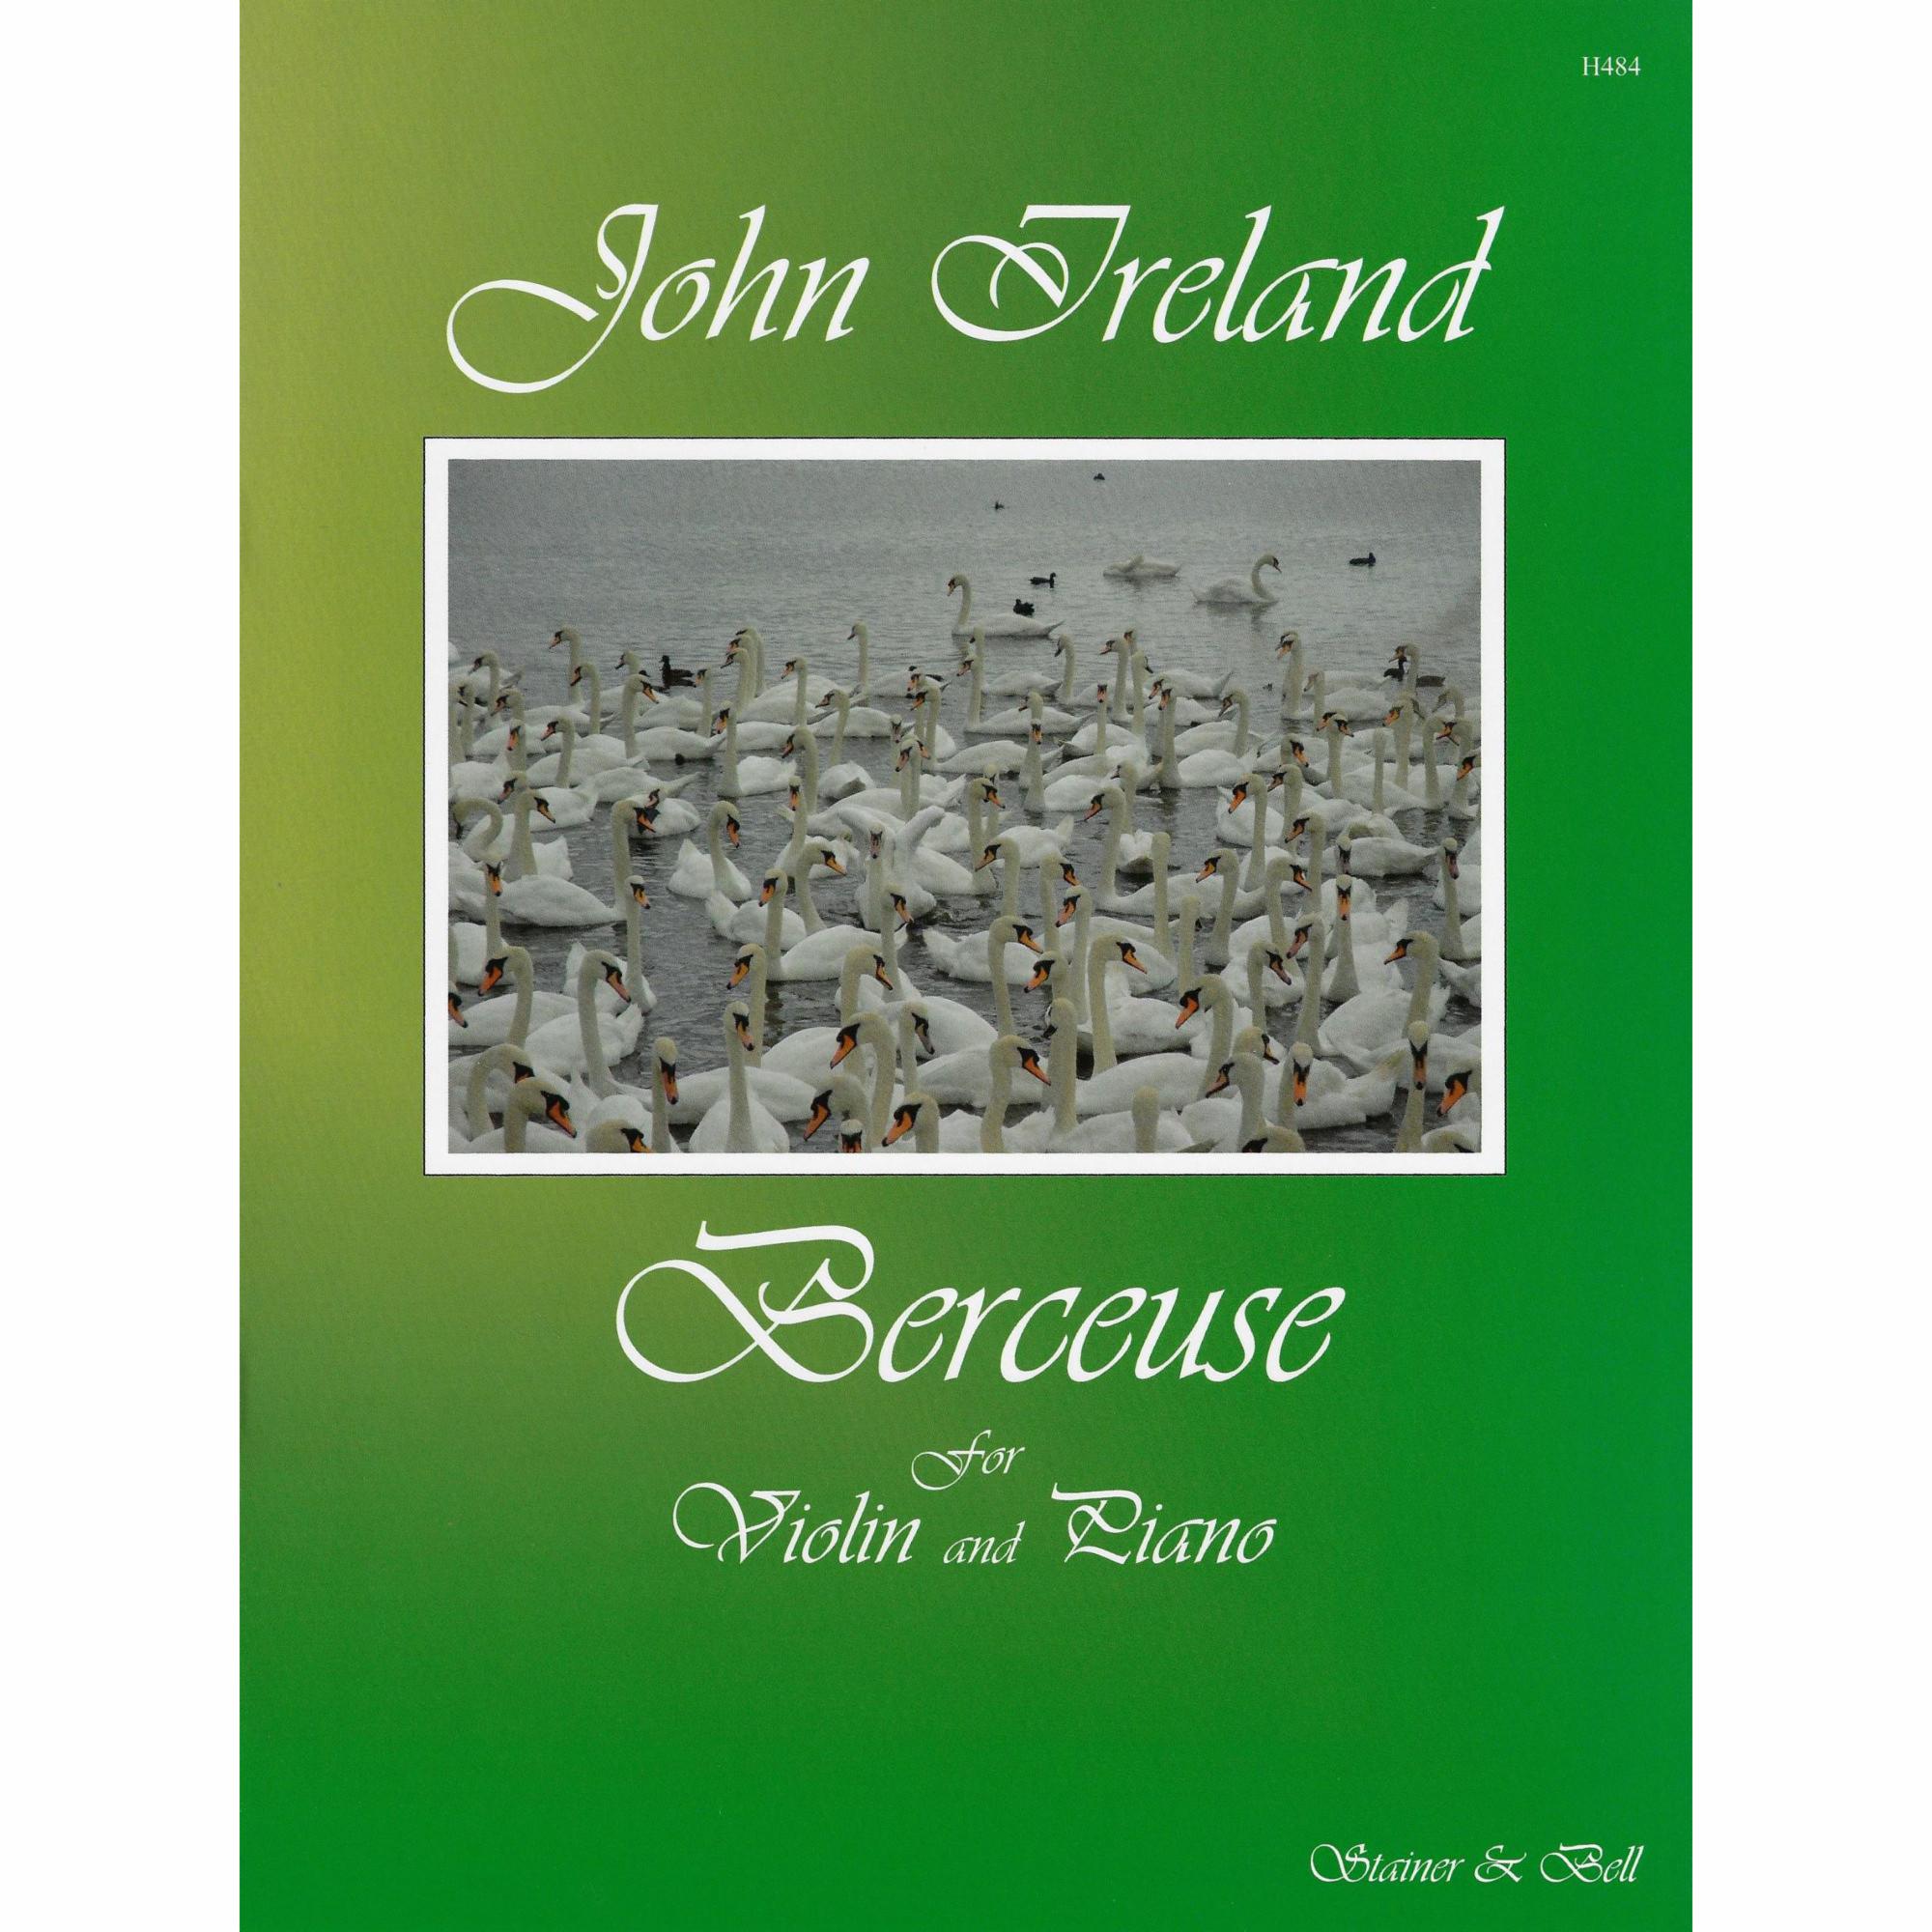 Ireland -- Berceuse for Violin and Piano